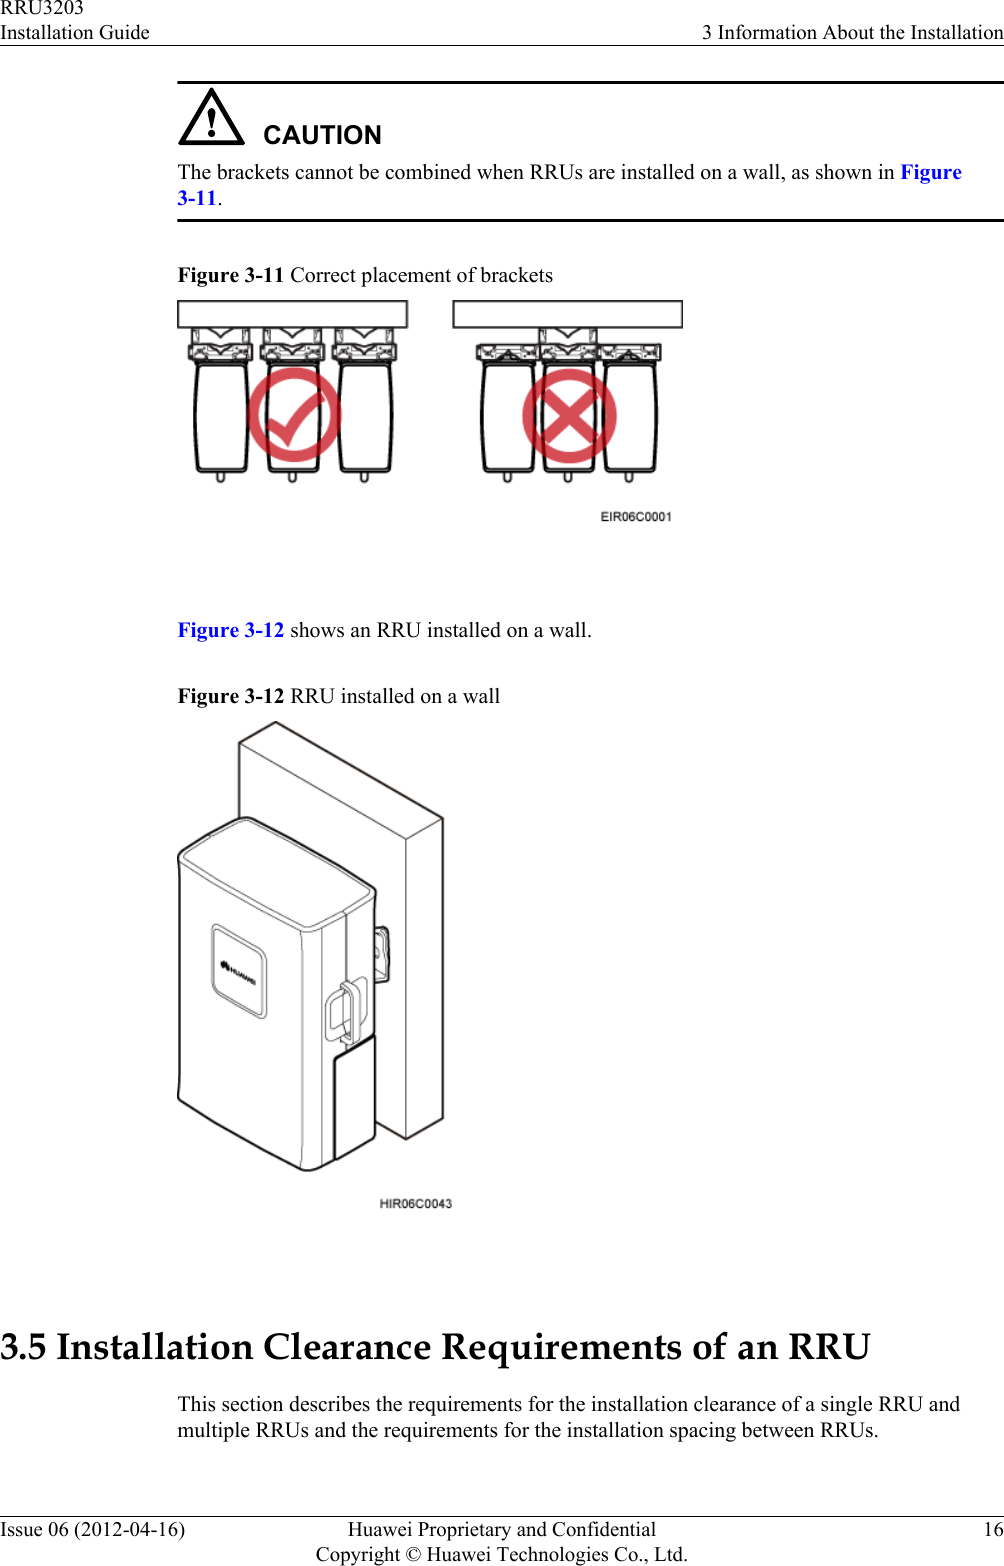 CAUTIONThe brackets cannot be combined when RRUs are installed on a wall, as shown in Figure3-11.Figure 3-11 Correct placement of brackets Figure 3-12 shows an RRU installed on a wall.Figure 3-12 RRU installed on a wall 3.5 Installation Clearance Requirements of an RRUThis section describes the requirements for the installation clearance of a single RRU andmultiple RRUs and the requirements for the installation spacing between RRUs.RRU3203Installation Guide 3 Information About the InstallationIssue 06 (2012-04-16) Huawei Proprietary and ConfidentialCopyright © Huawei Technologies Co., Ltd.16